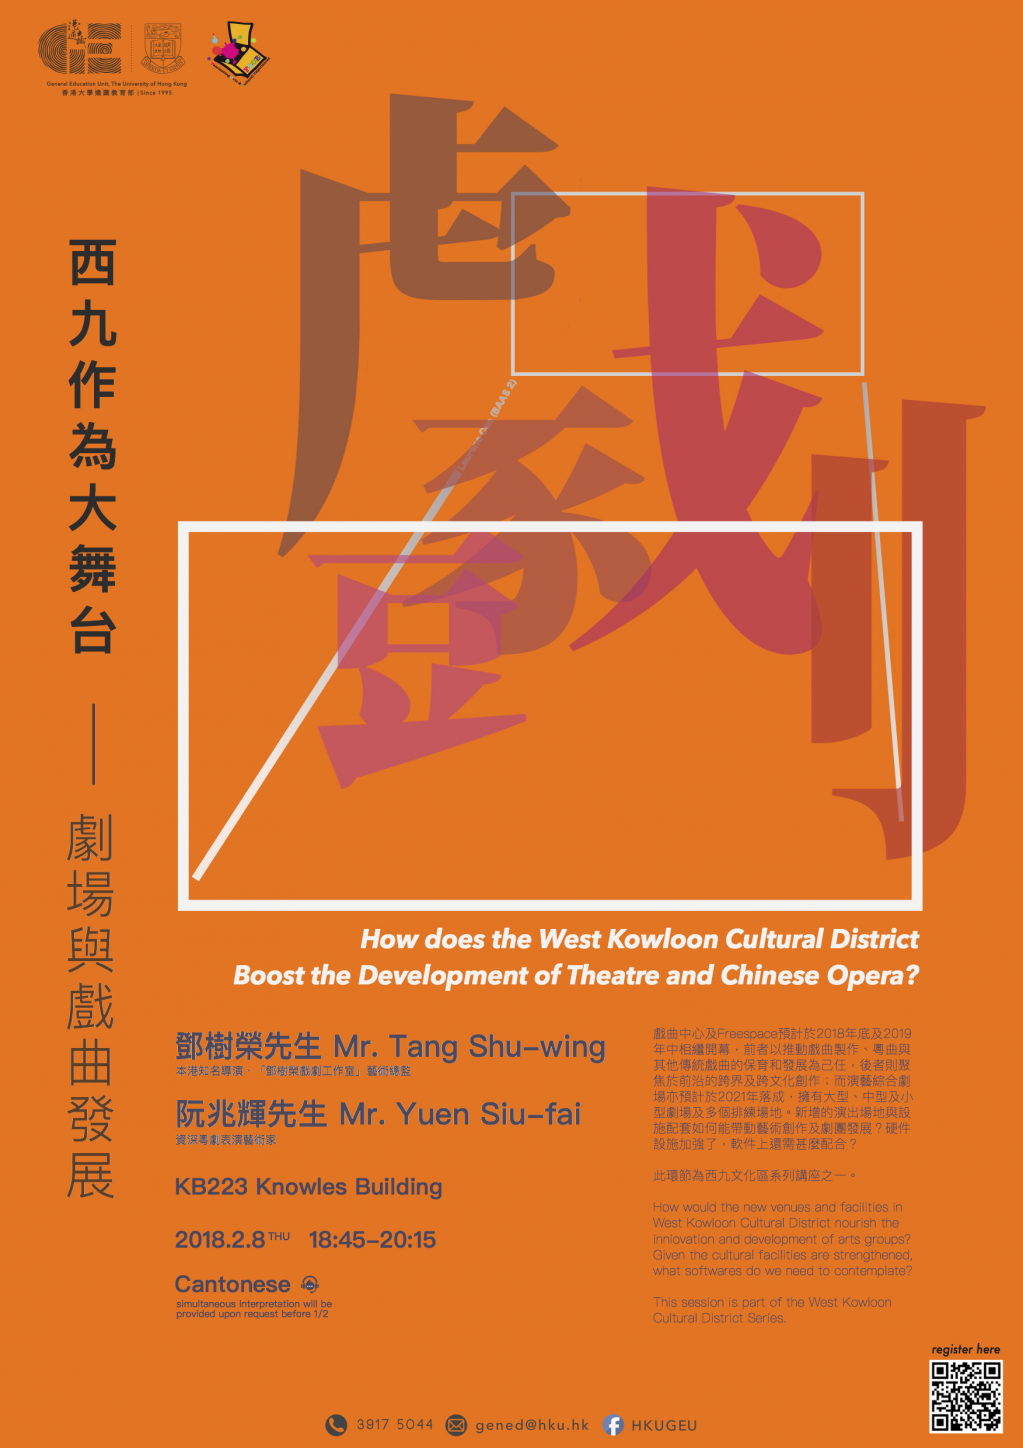 [GE Talk] 阮兆輝 x 鄧樹榮: 西九作為大舞台──劇場與戲曲發展 How does the West Kowloon Cultural District Boost the Development of Theatre and Chinese Opera?